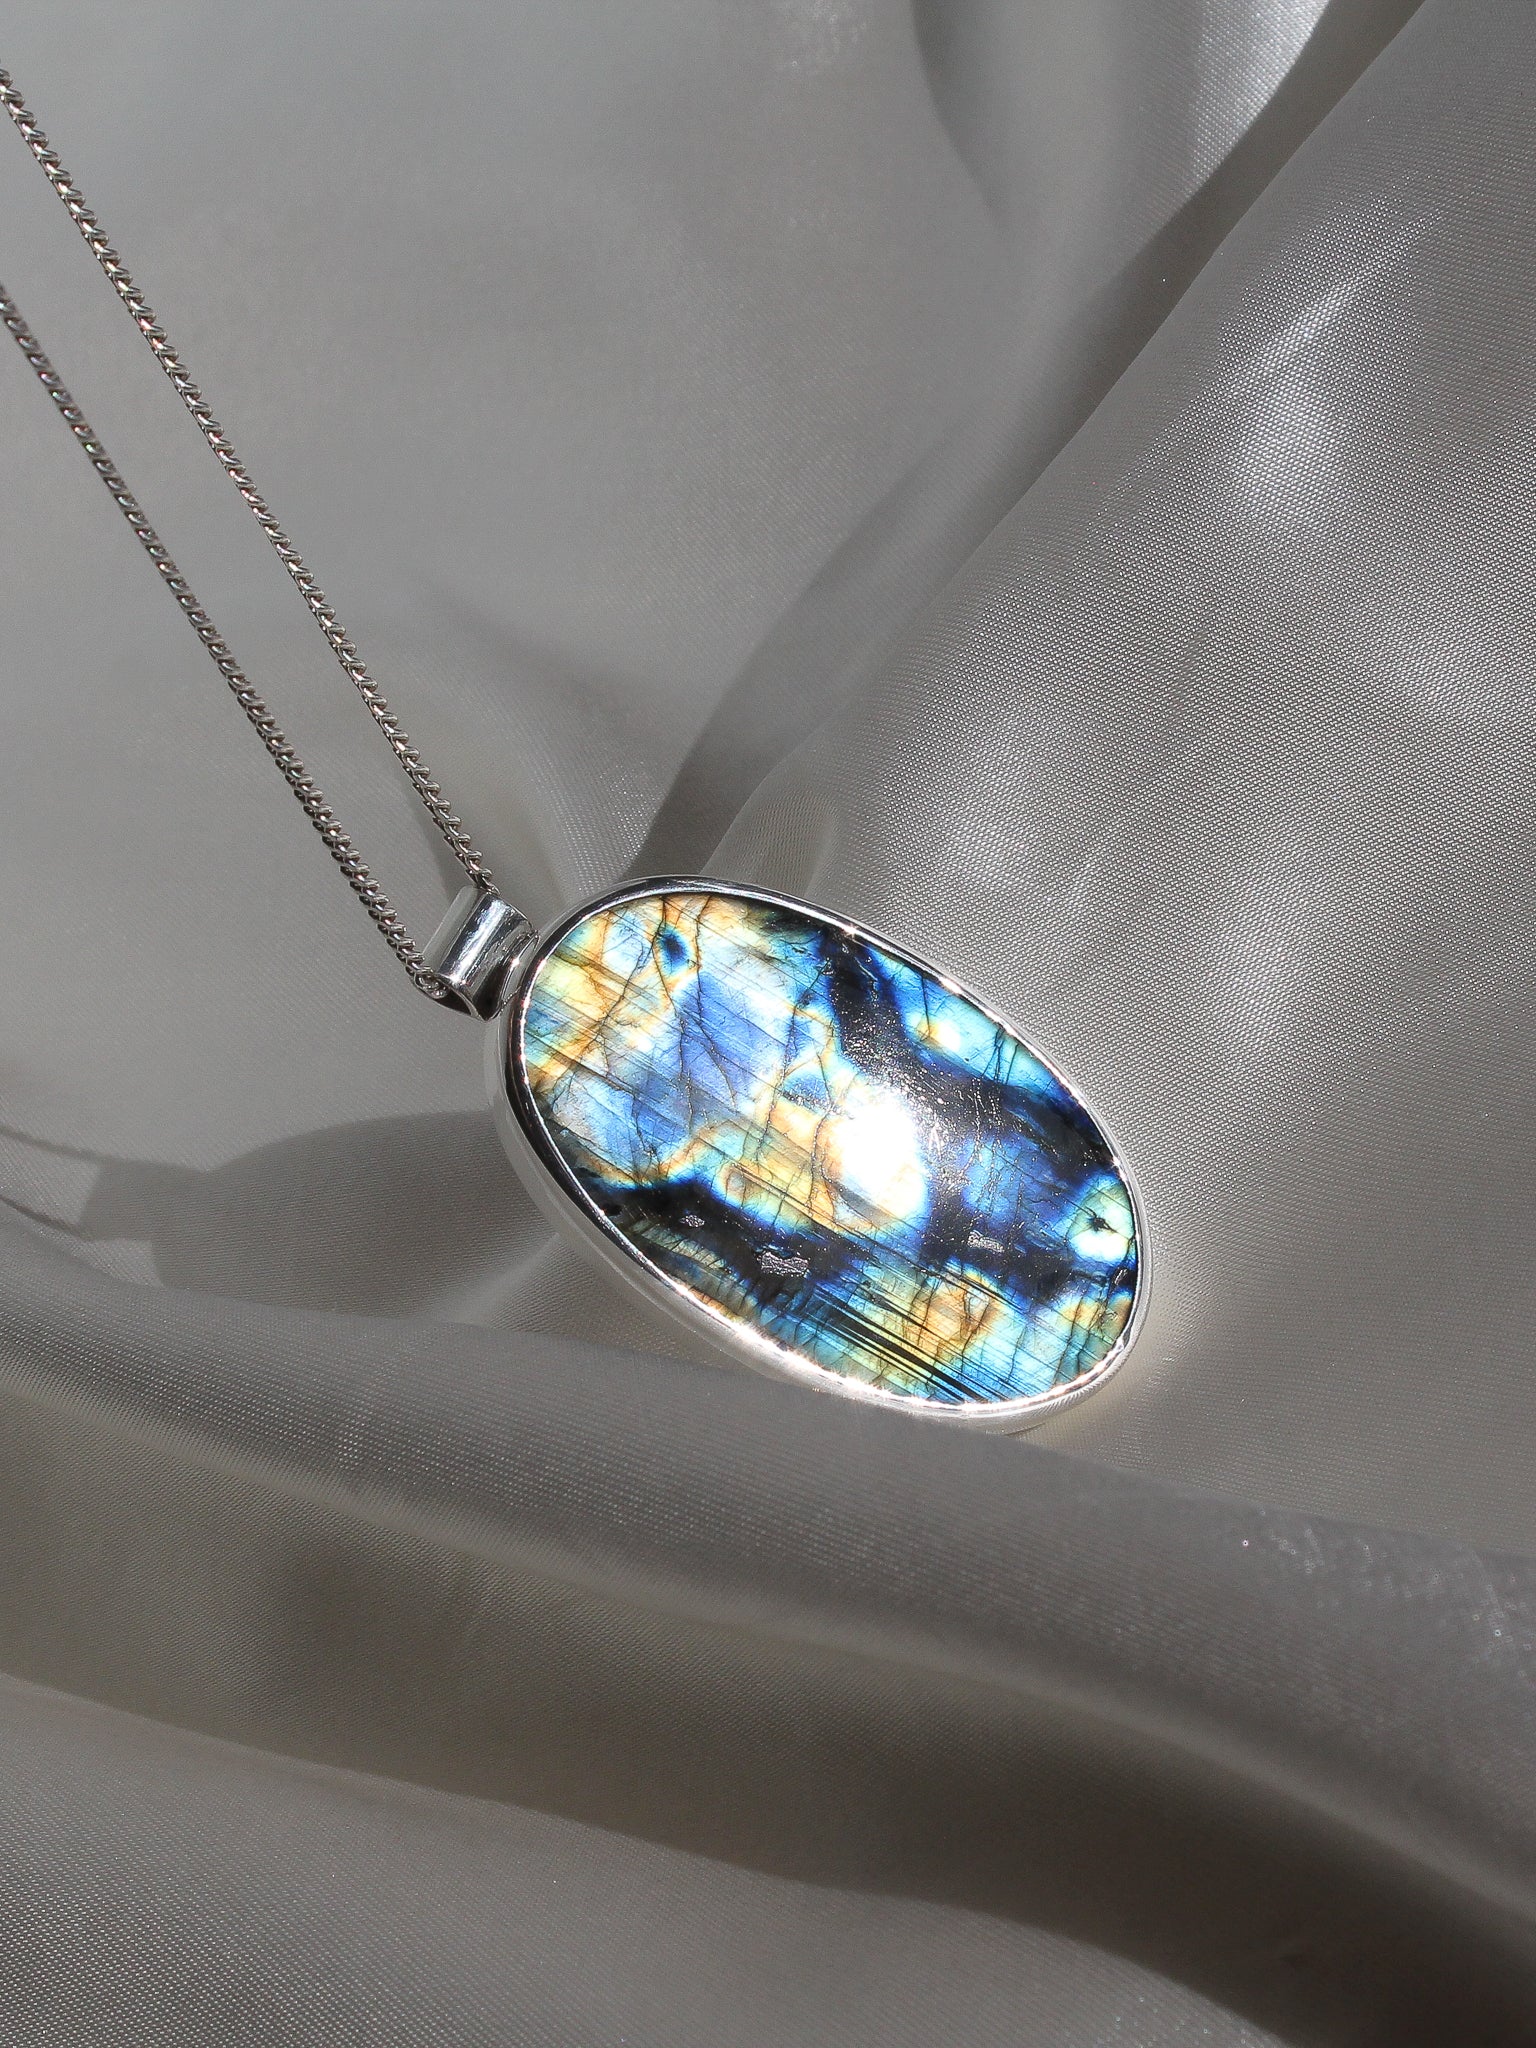 Handmade 925 sterling silver pendant with flashy labradorite stone lily and William jewelry